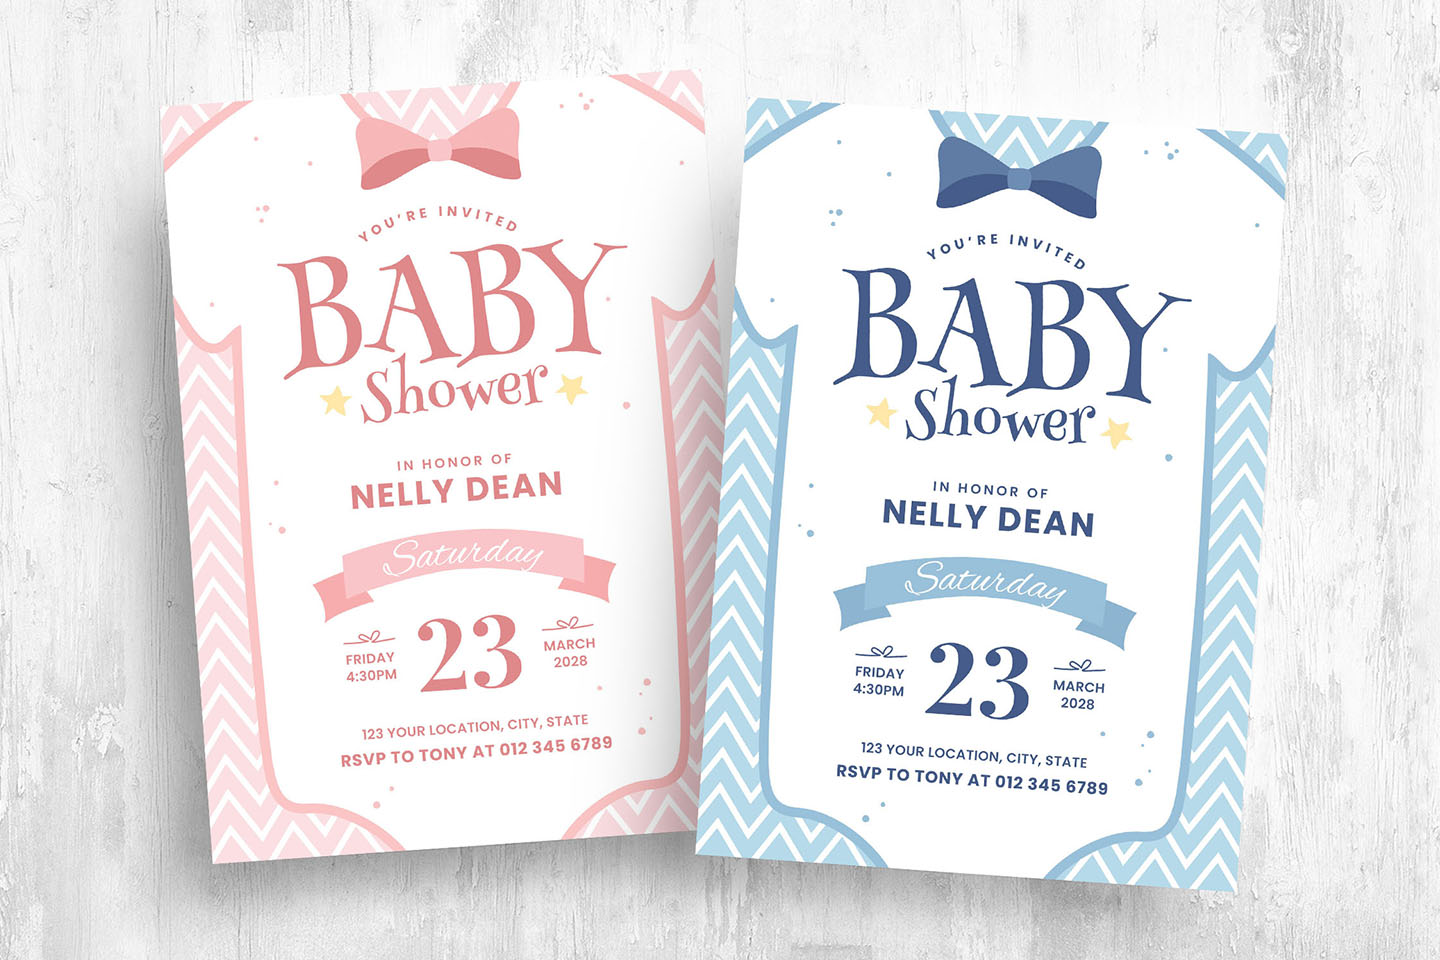 Baby Shower Invitation Flyer Template [PSD, Ai, Vector] - BrandPacks Within Baby Shower Flyer Template